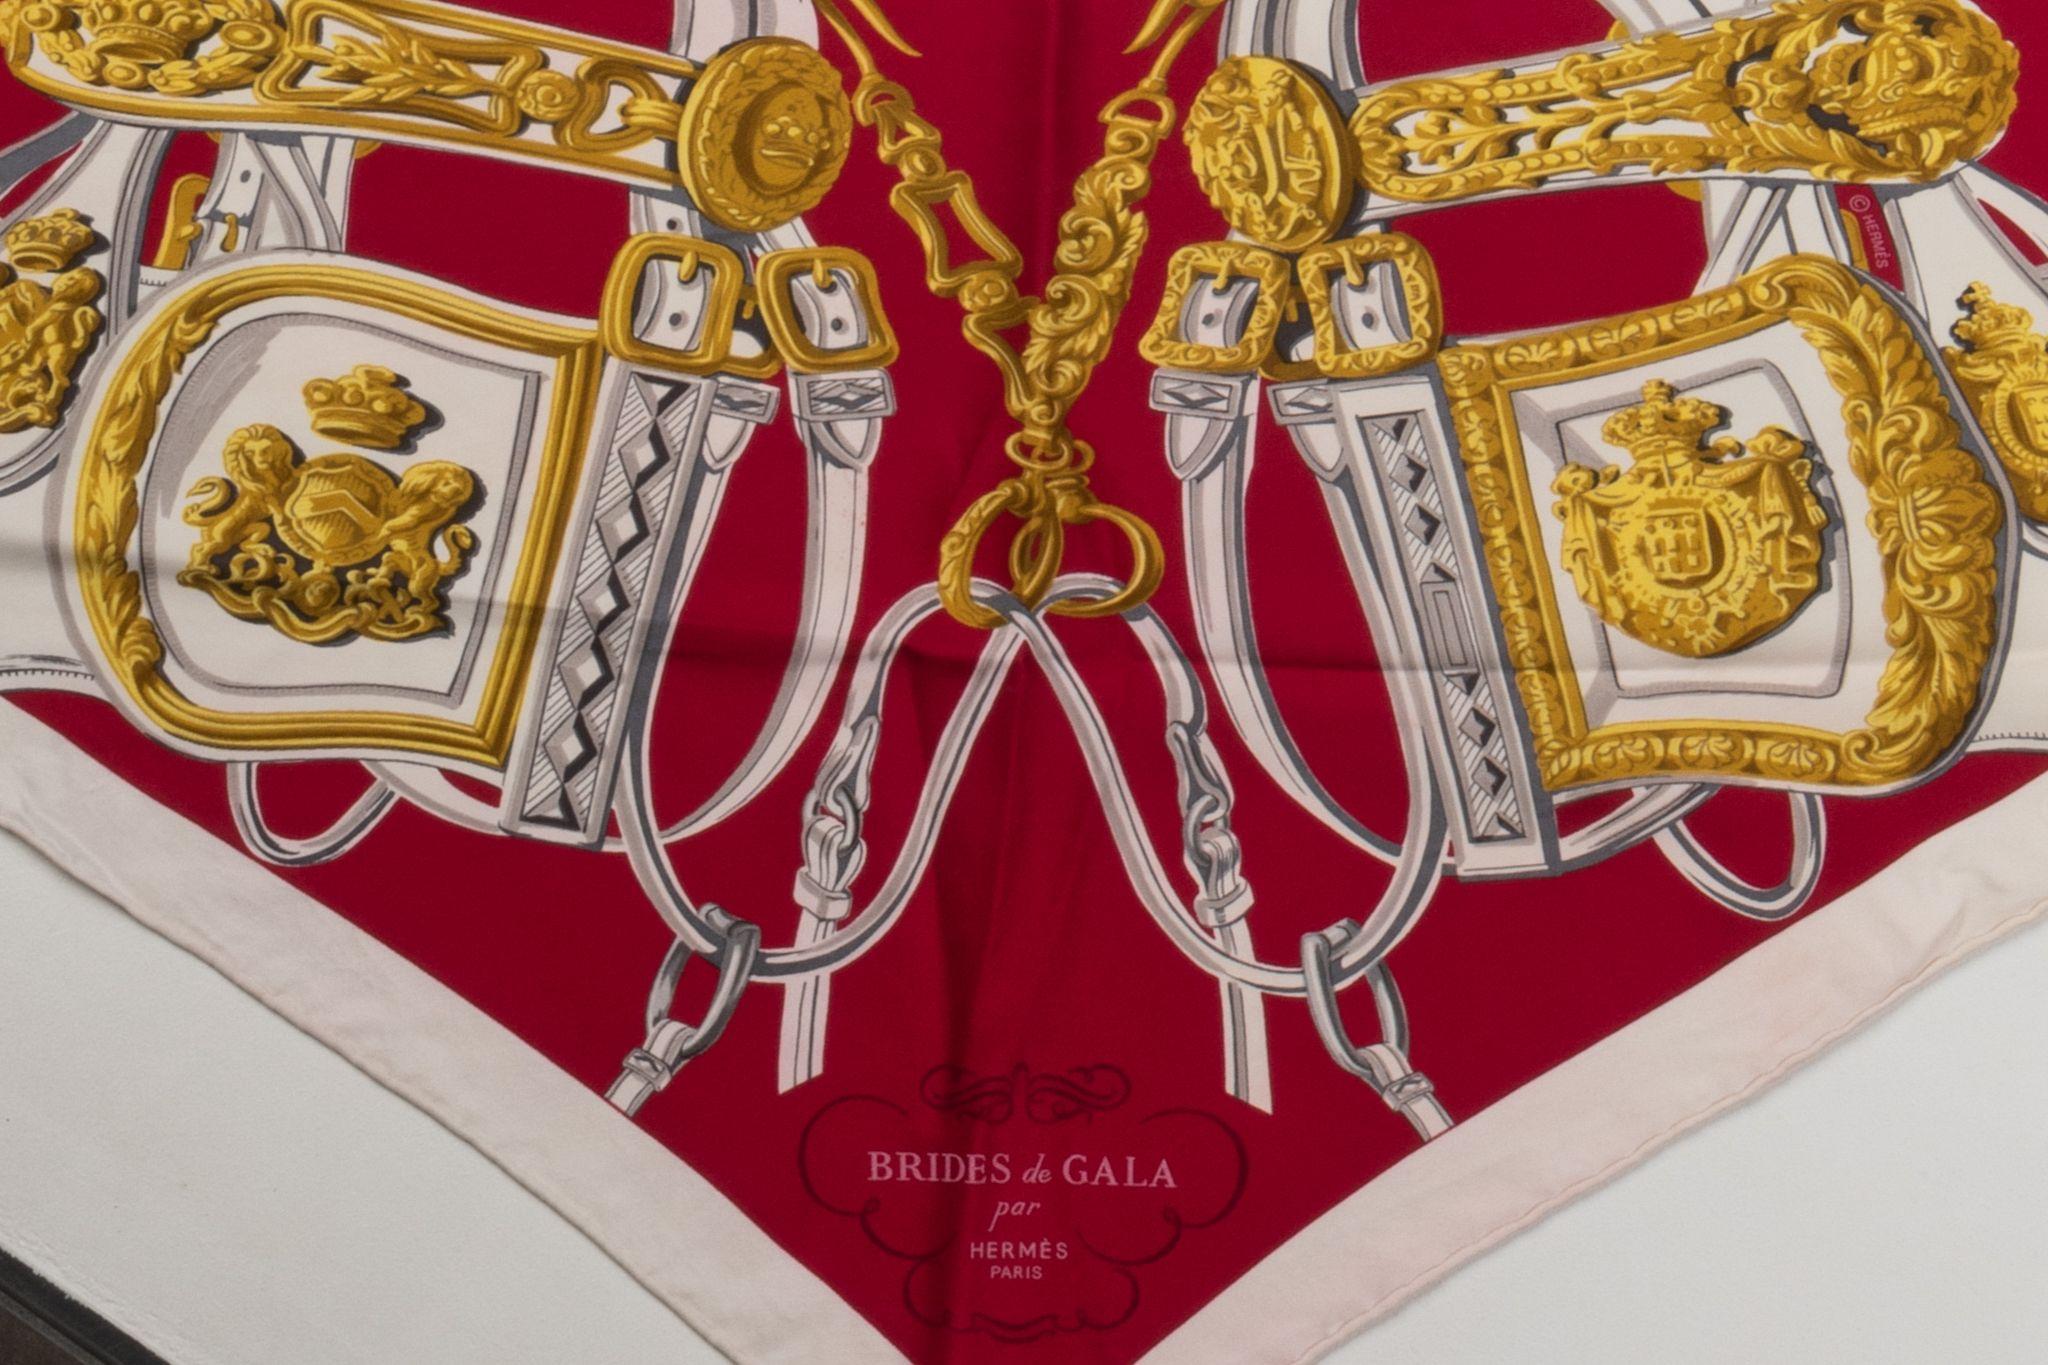 Hermes Triangle Brides de Gala Scarf In Excellent Condition For Sale In West Hollywood, CA